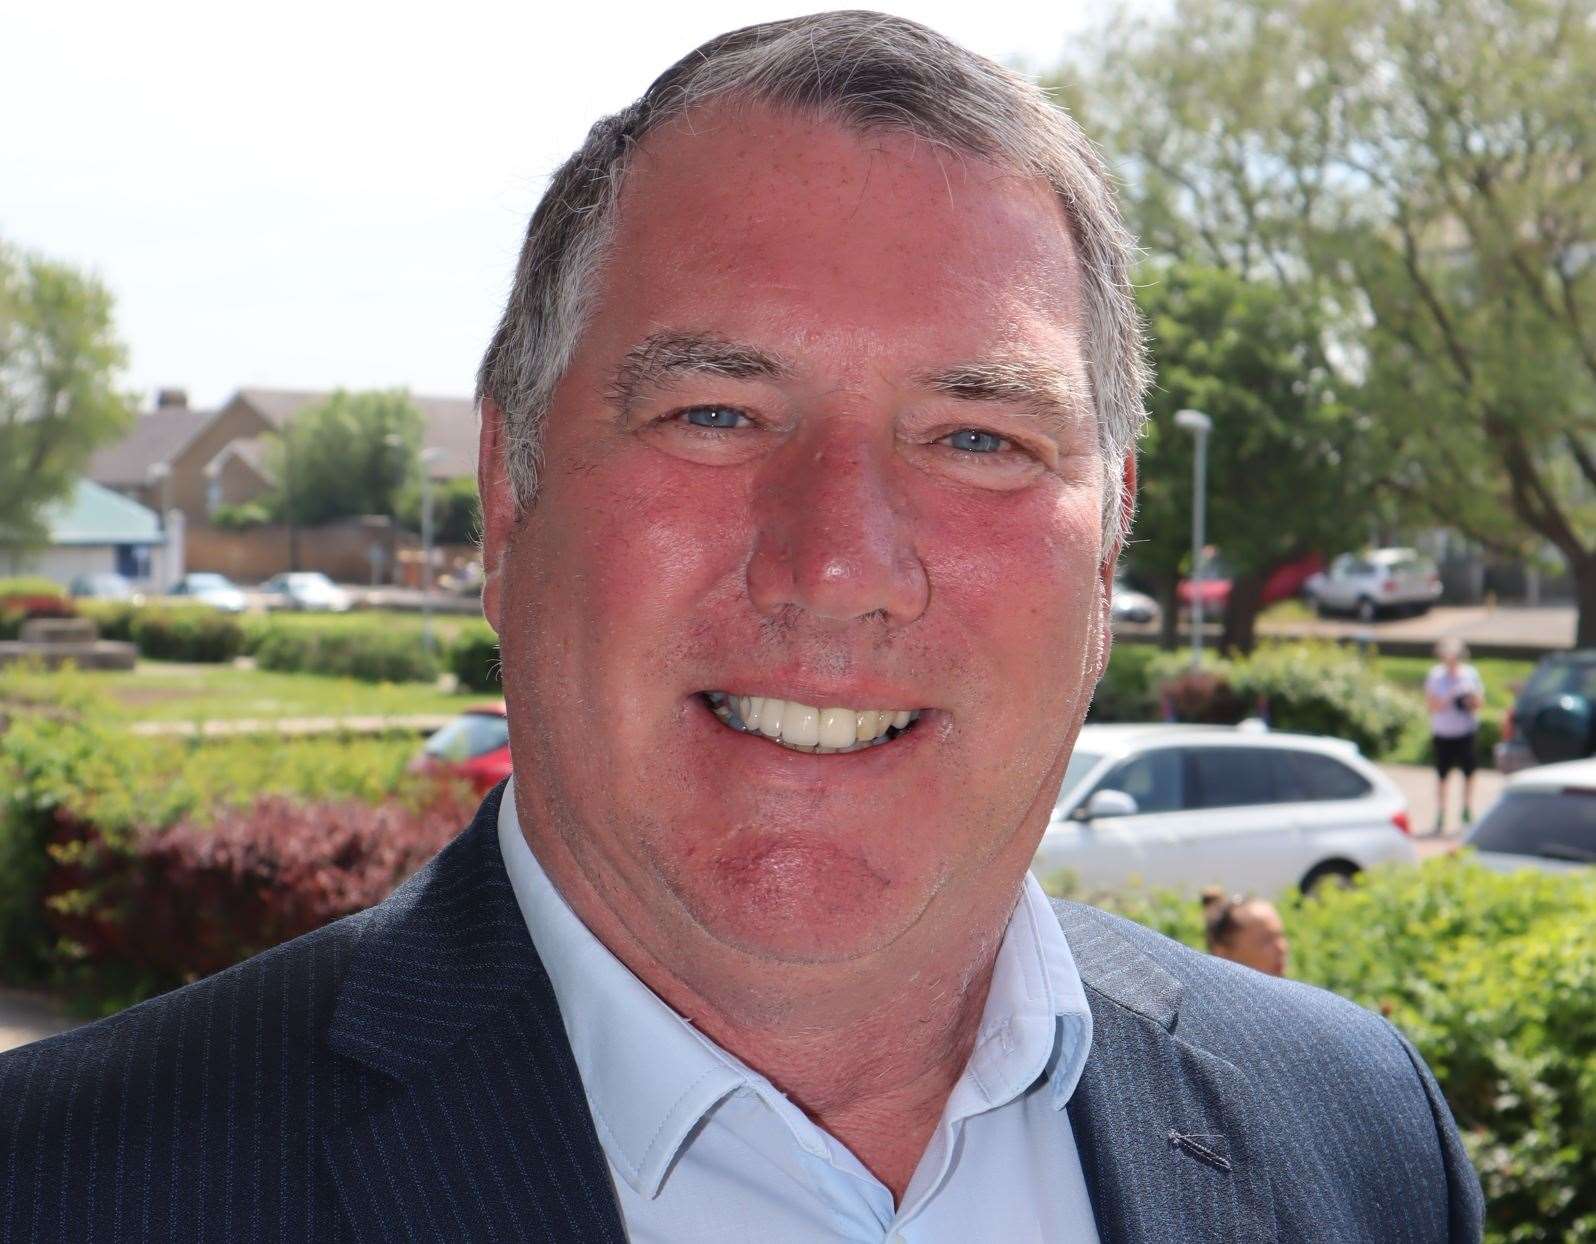 Cllr Mike Whiting says residents are 'bewildered by the lack of action'